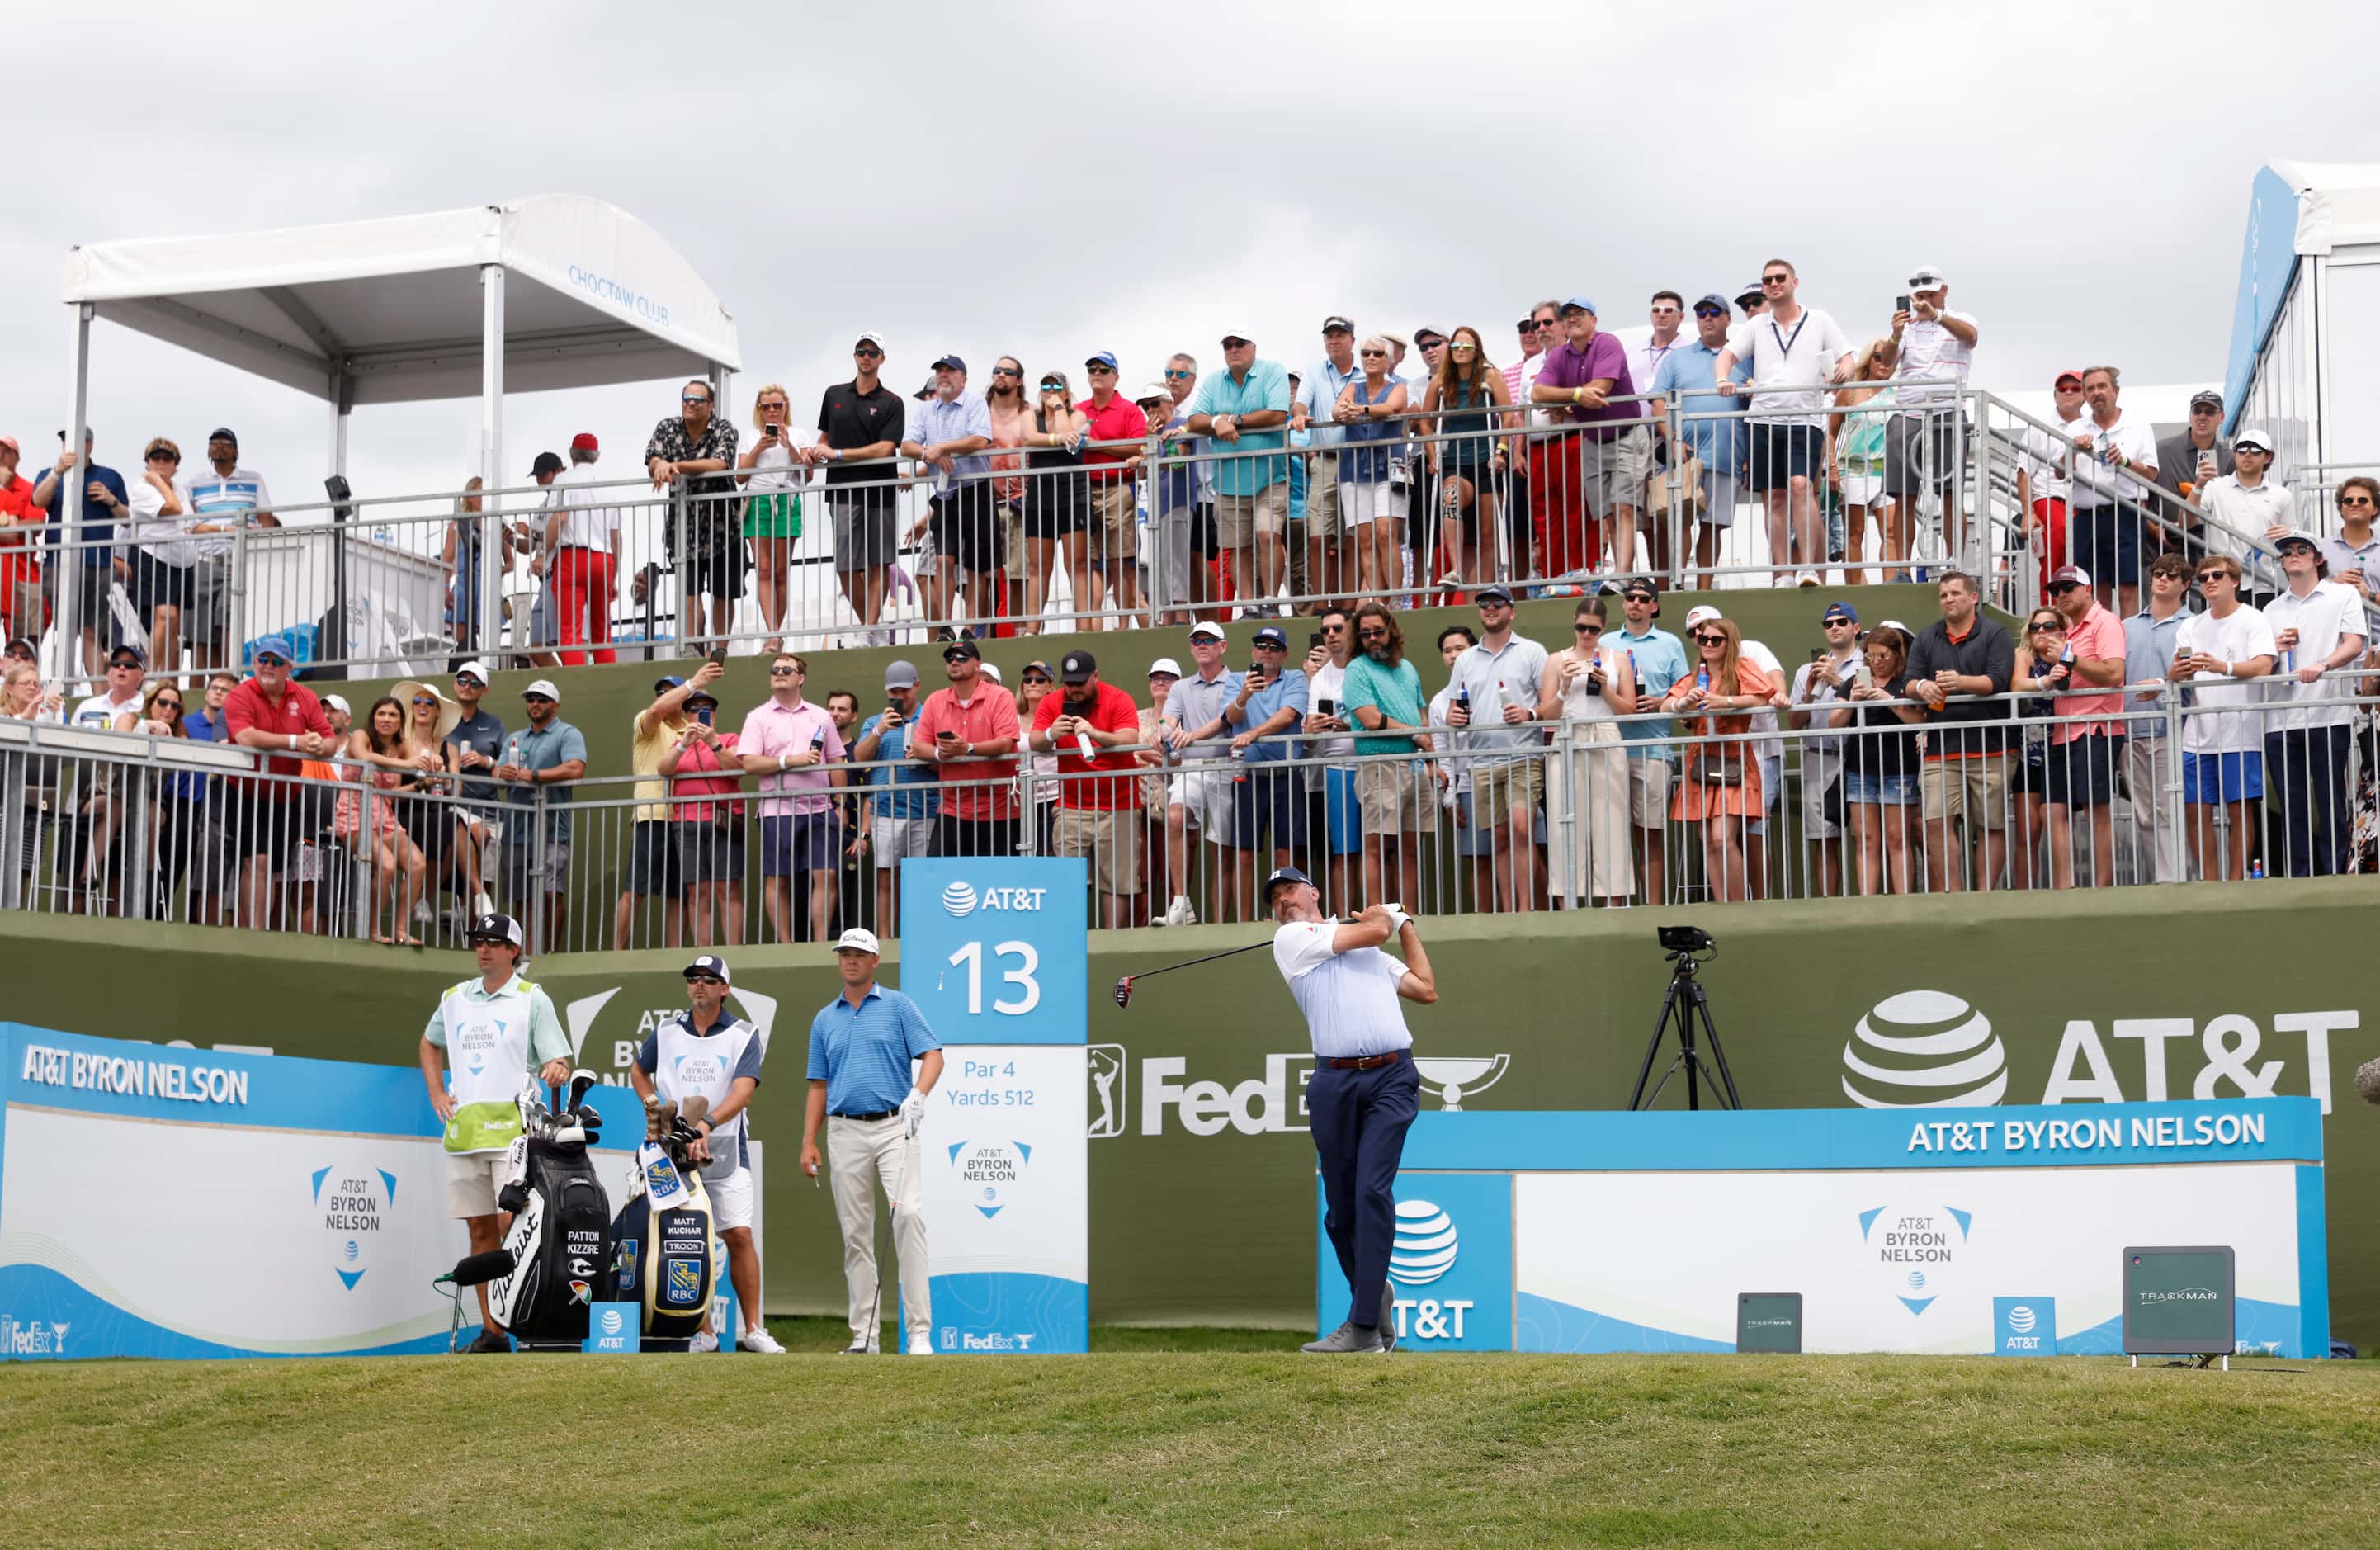 Matt Kuchar tees off on the 13th hole during round 3 of the AT&T Byron Nelson  at TPC Craig...